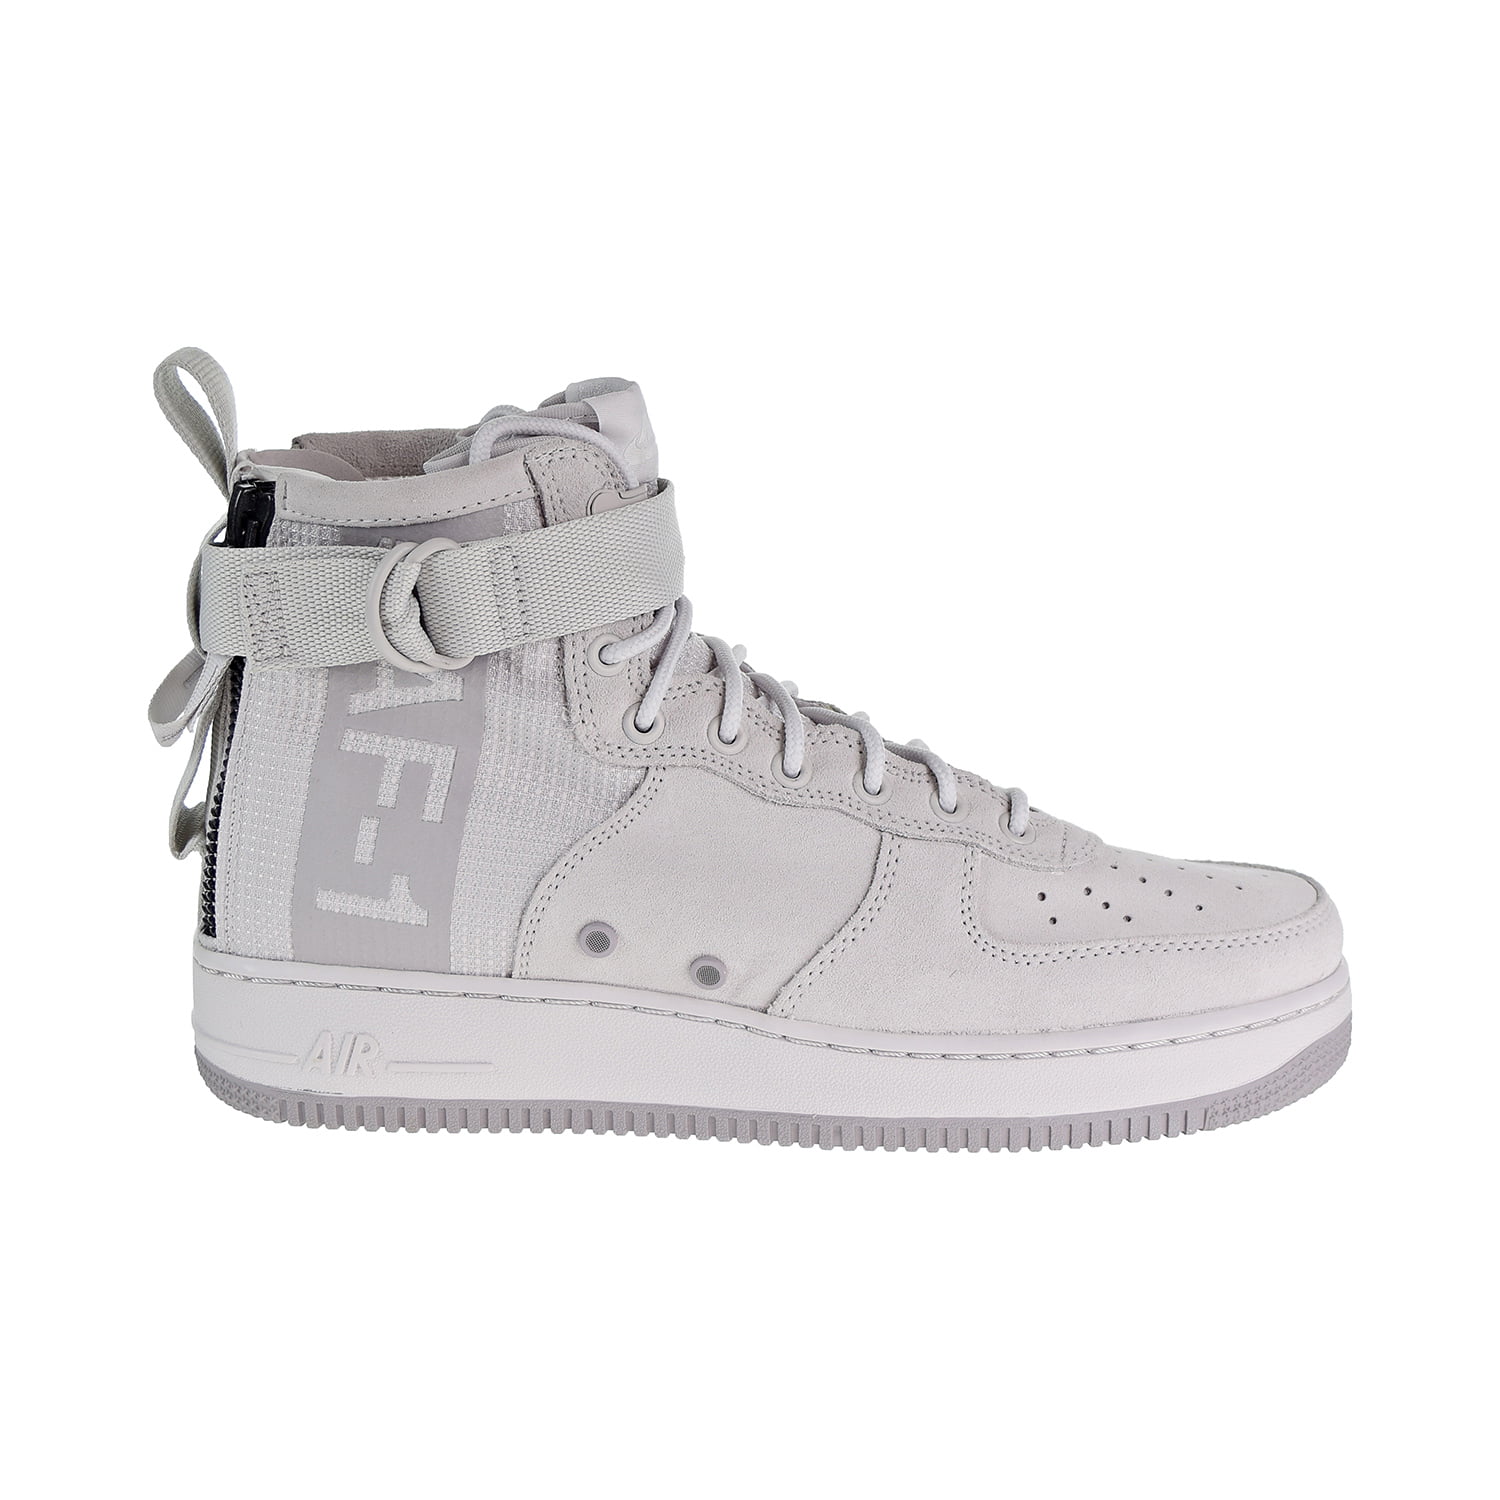 Nike SF Air Force 1 Mid 17 Men's Shoes 